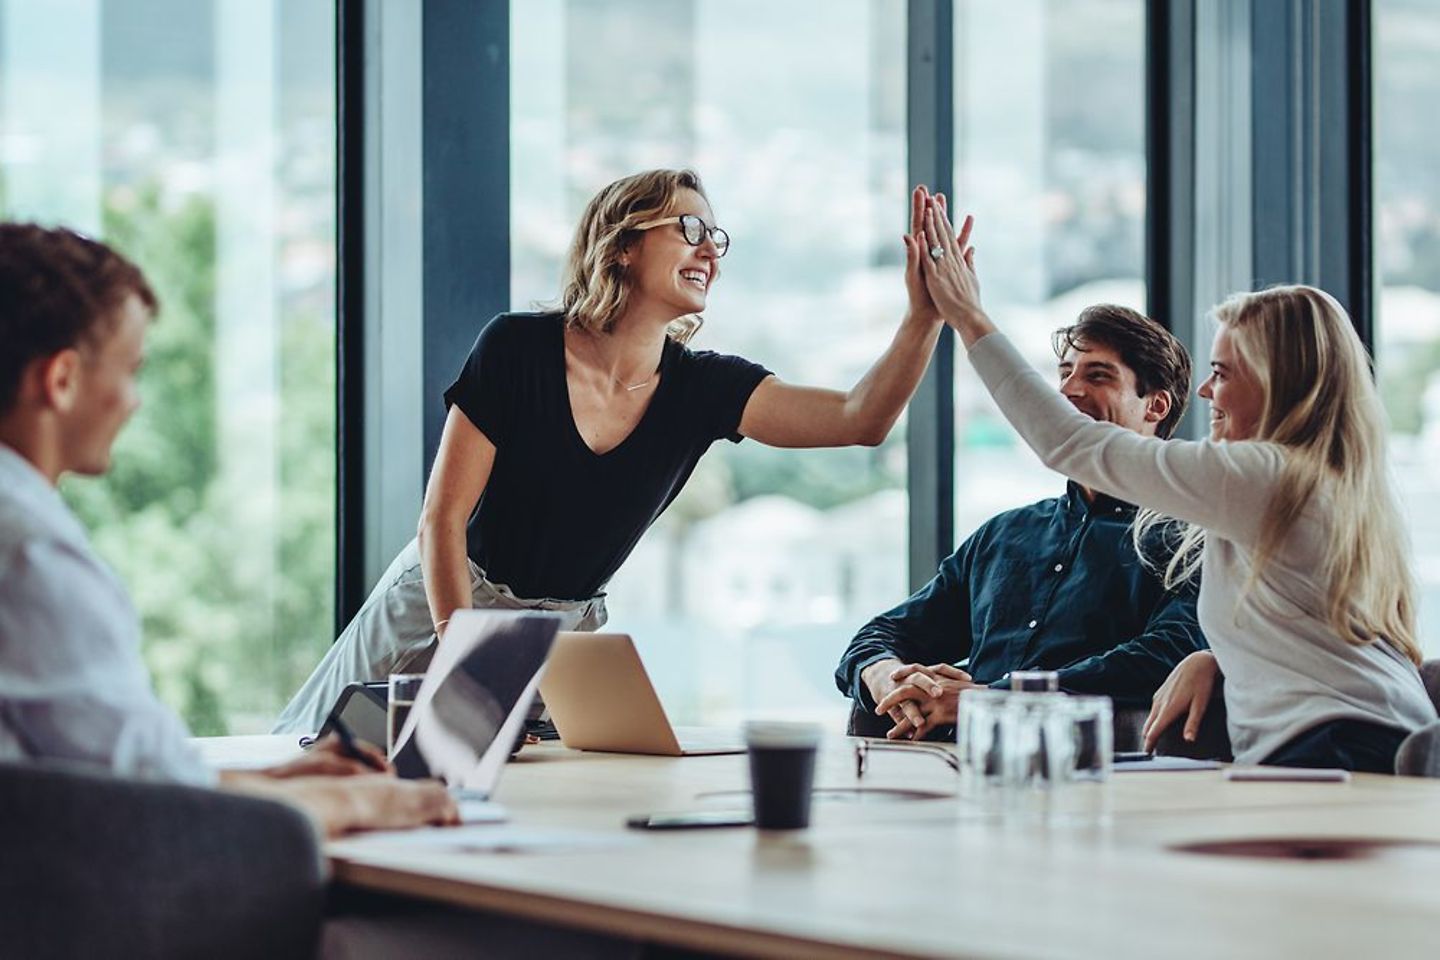 Two businesswomen high five each other in a meeting